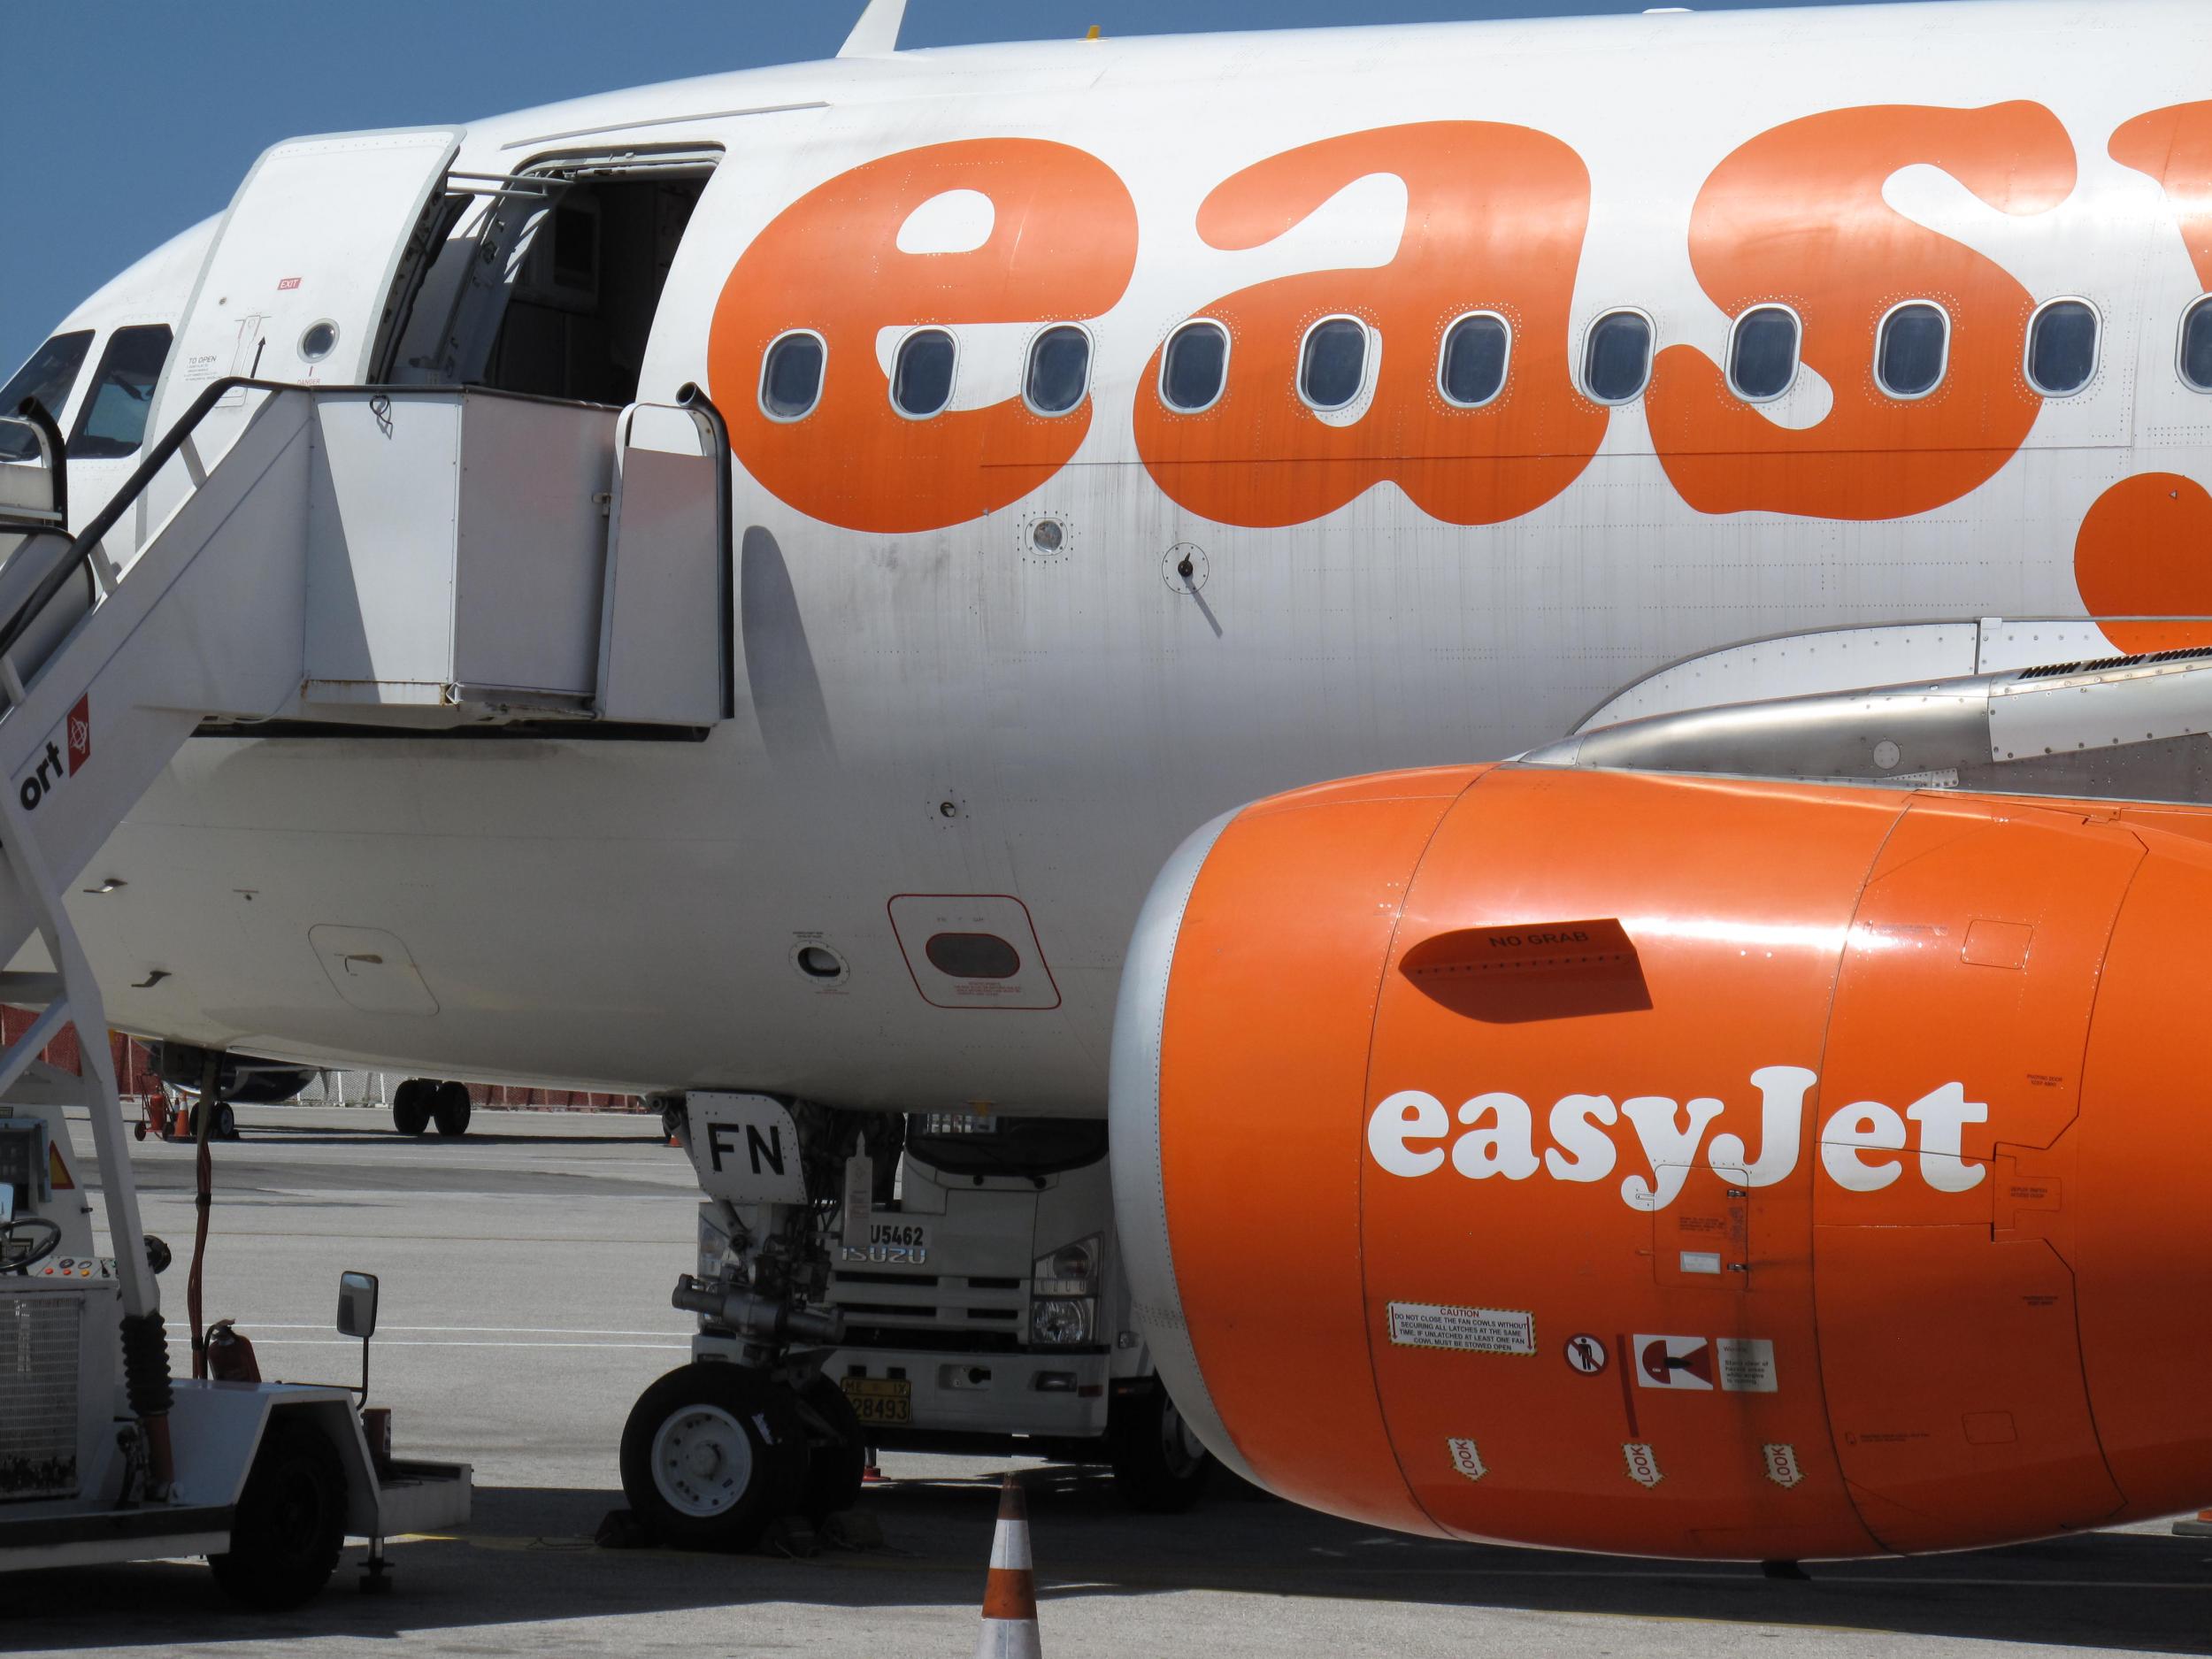 Domestic bliss: easyJet has a busy network of internal flights in several European countries